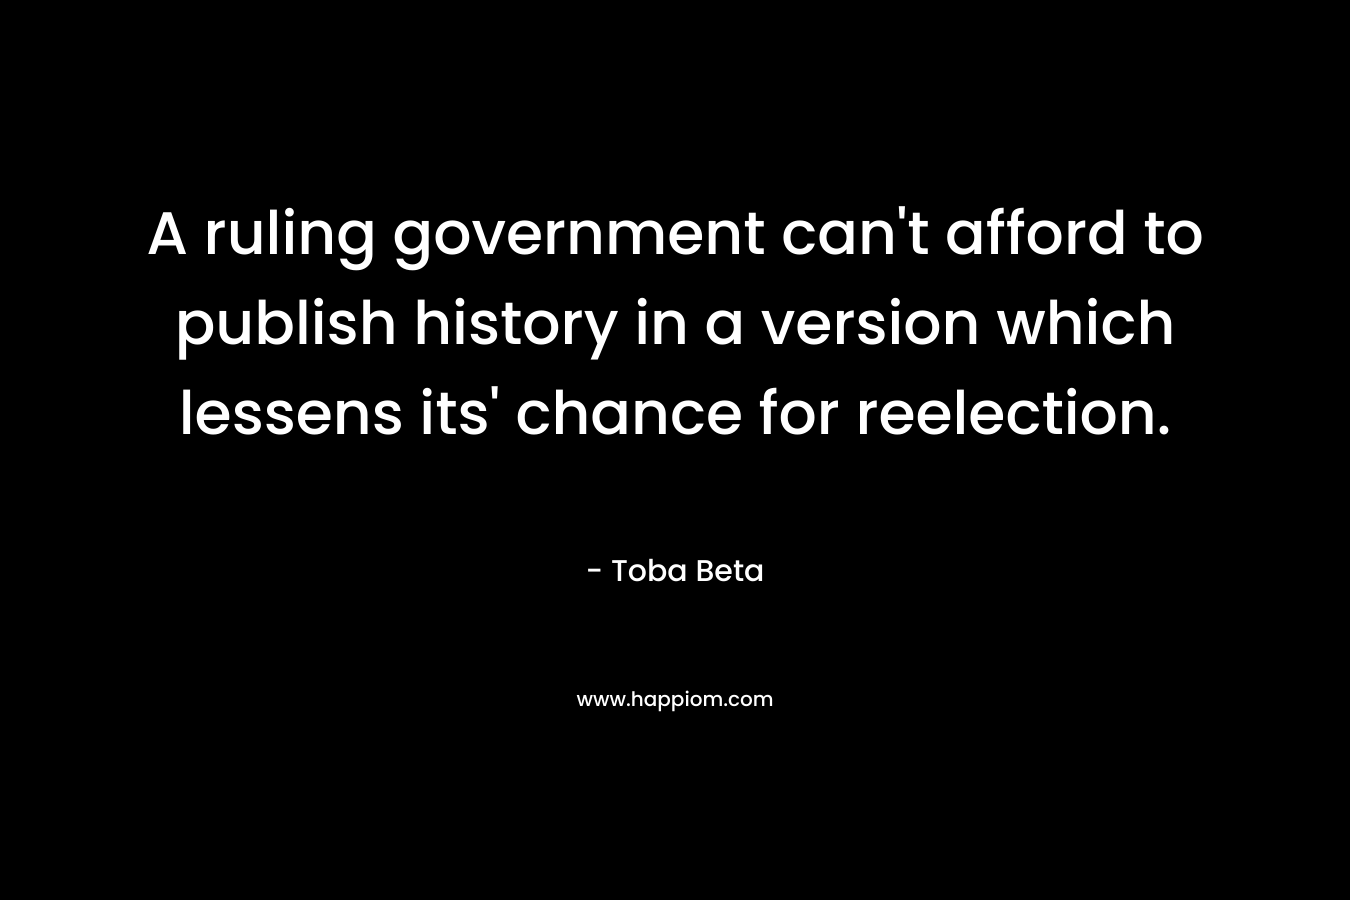 A ruling government can't afford to publish history in a version which lessens its' chance for reelection.